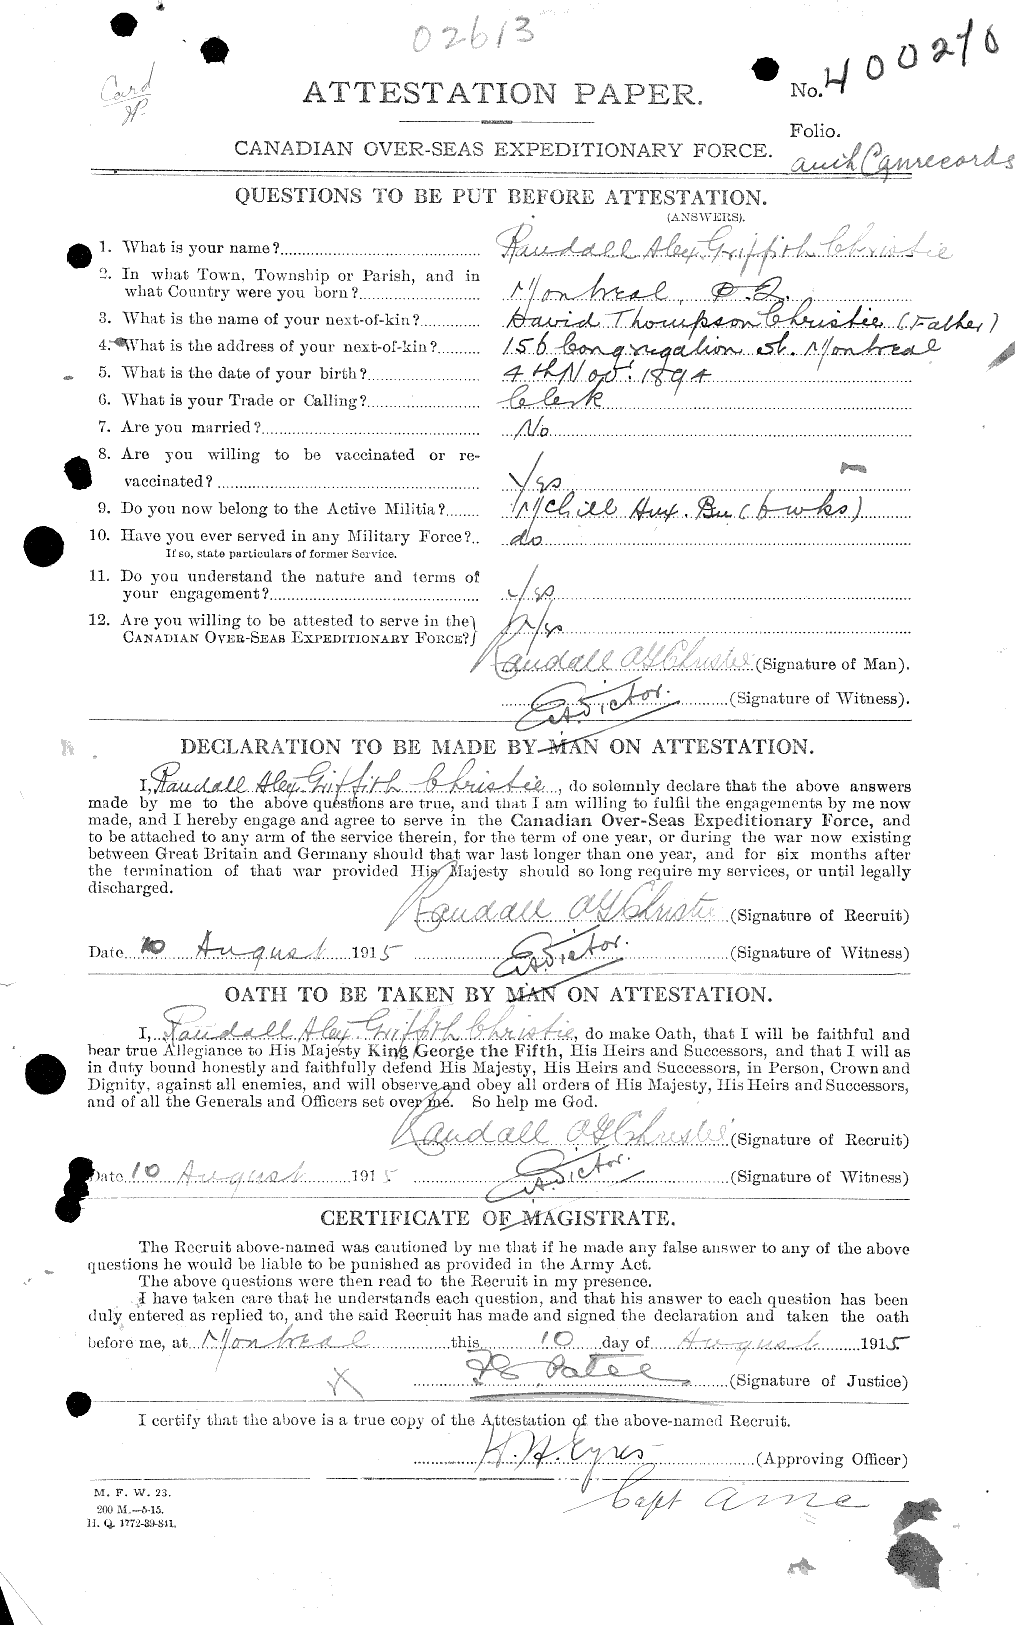 Personnel Records of the First World War - CEF 022043a